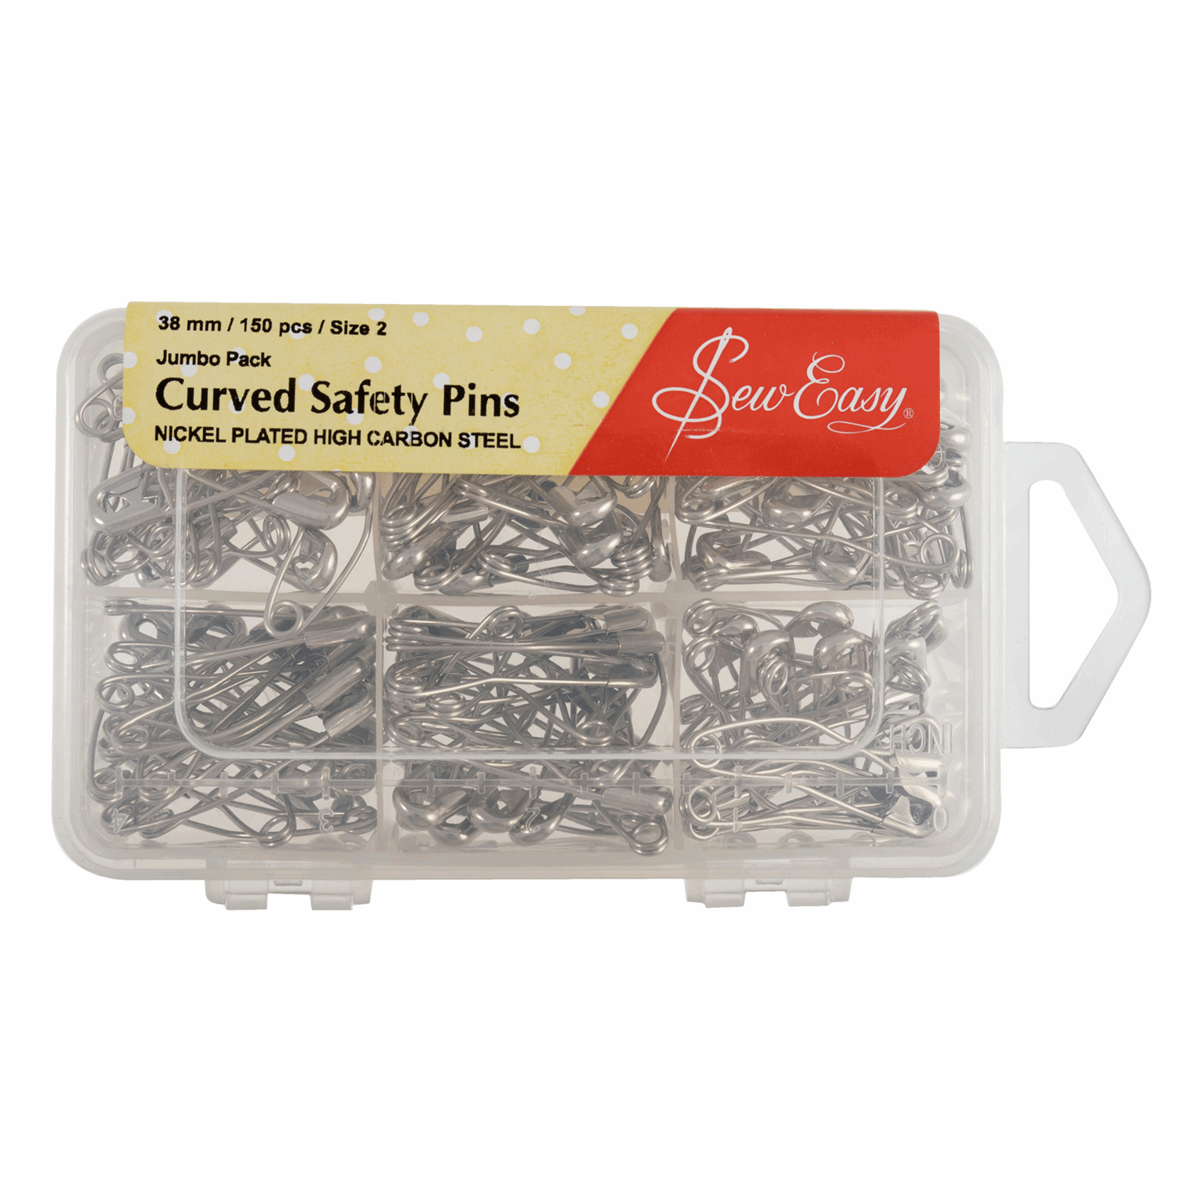 Sew Easy Curved Safety Pins 38mm. Pack of 150